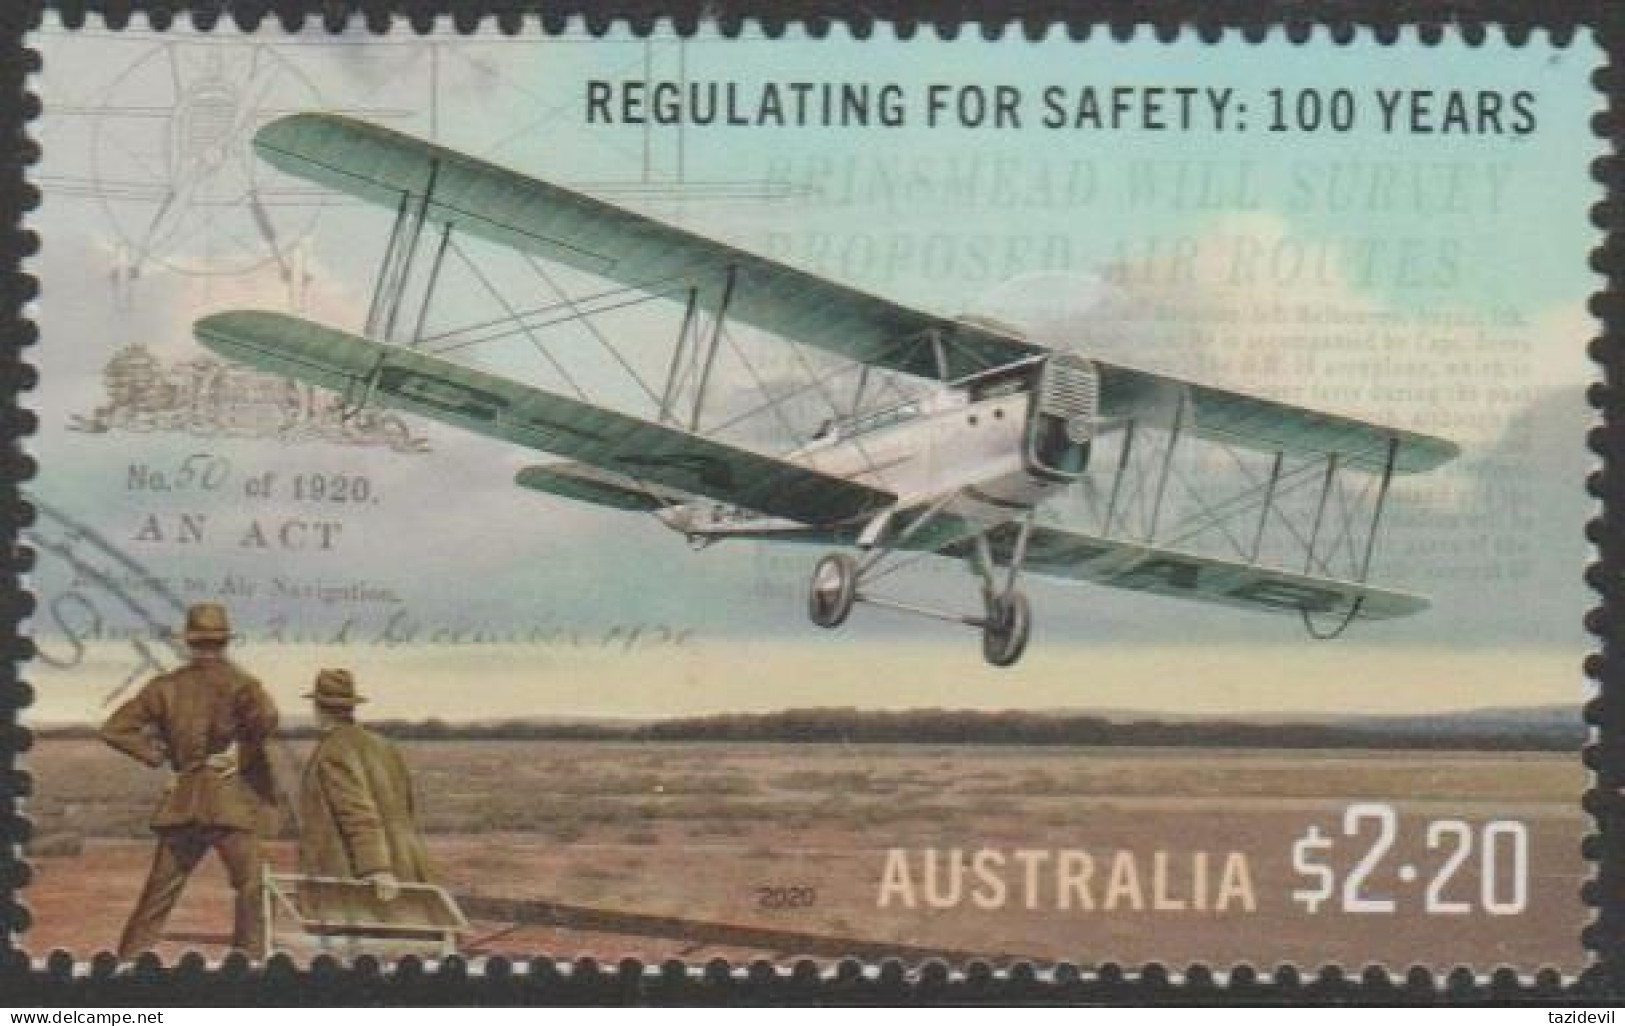 AUSTRALIA - USED 2020 $2.20 Civil Aviation - Regulating For Saftey One Hundred Years - Aircraft - Gebraucht